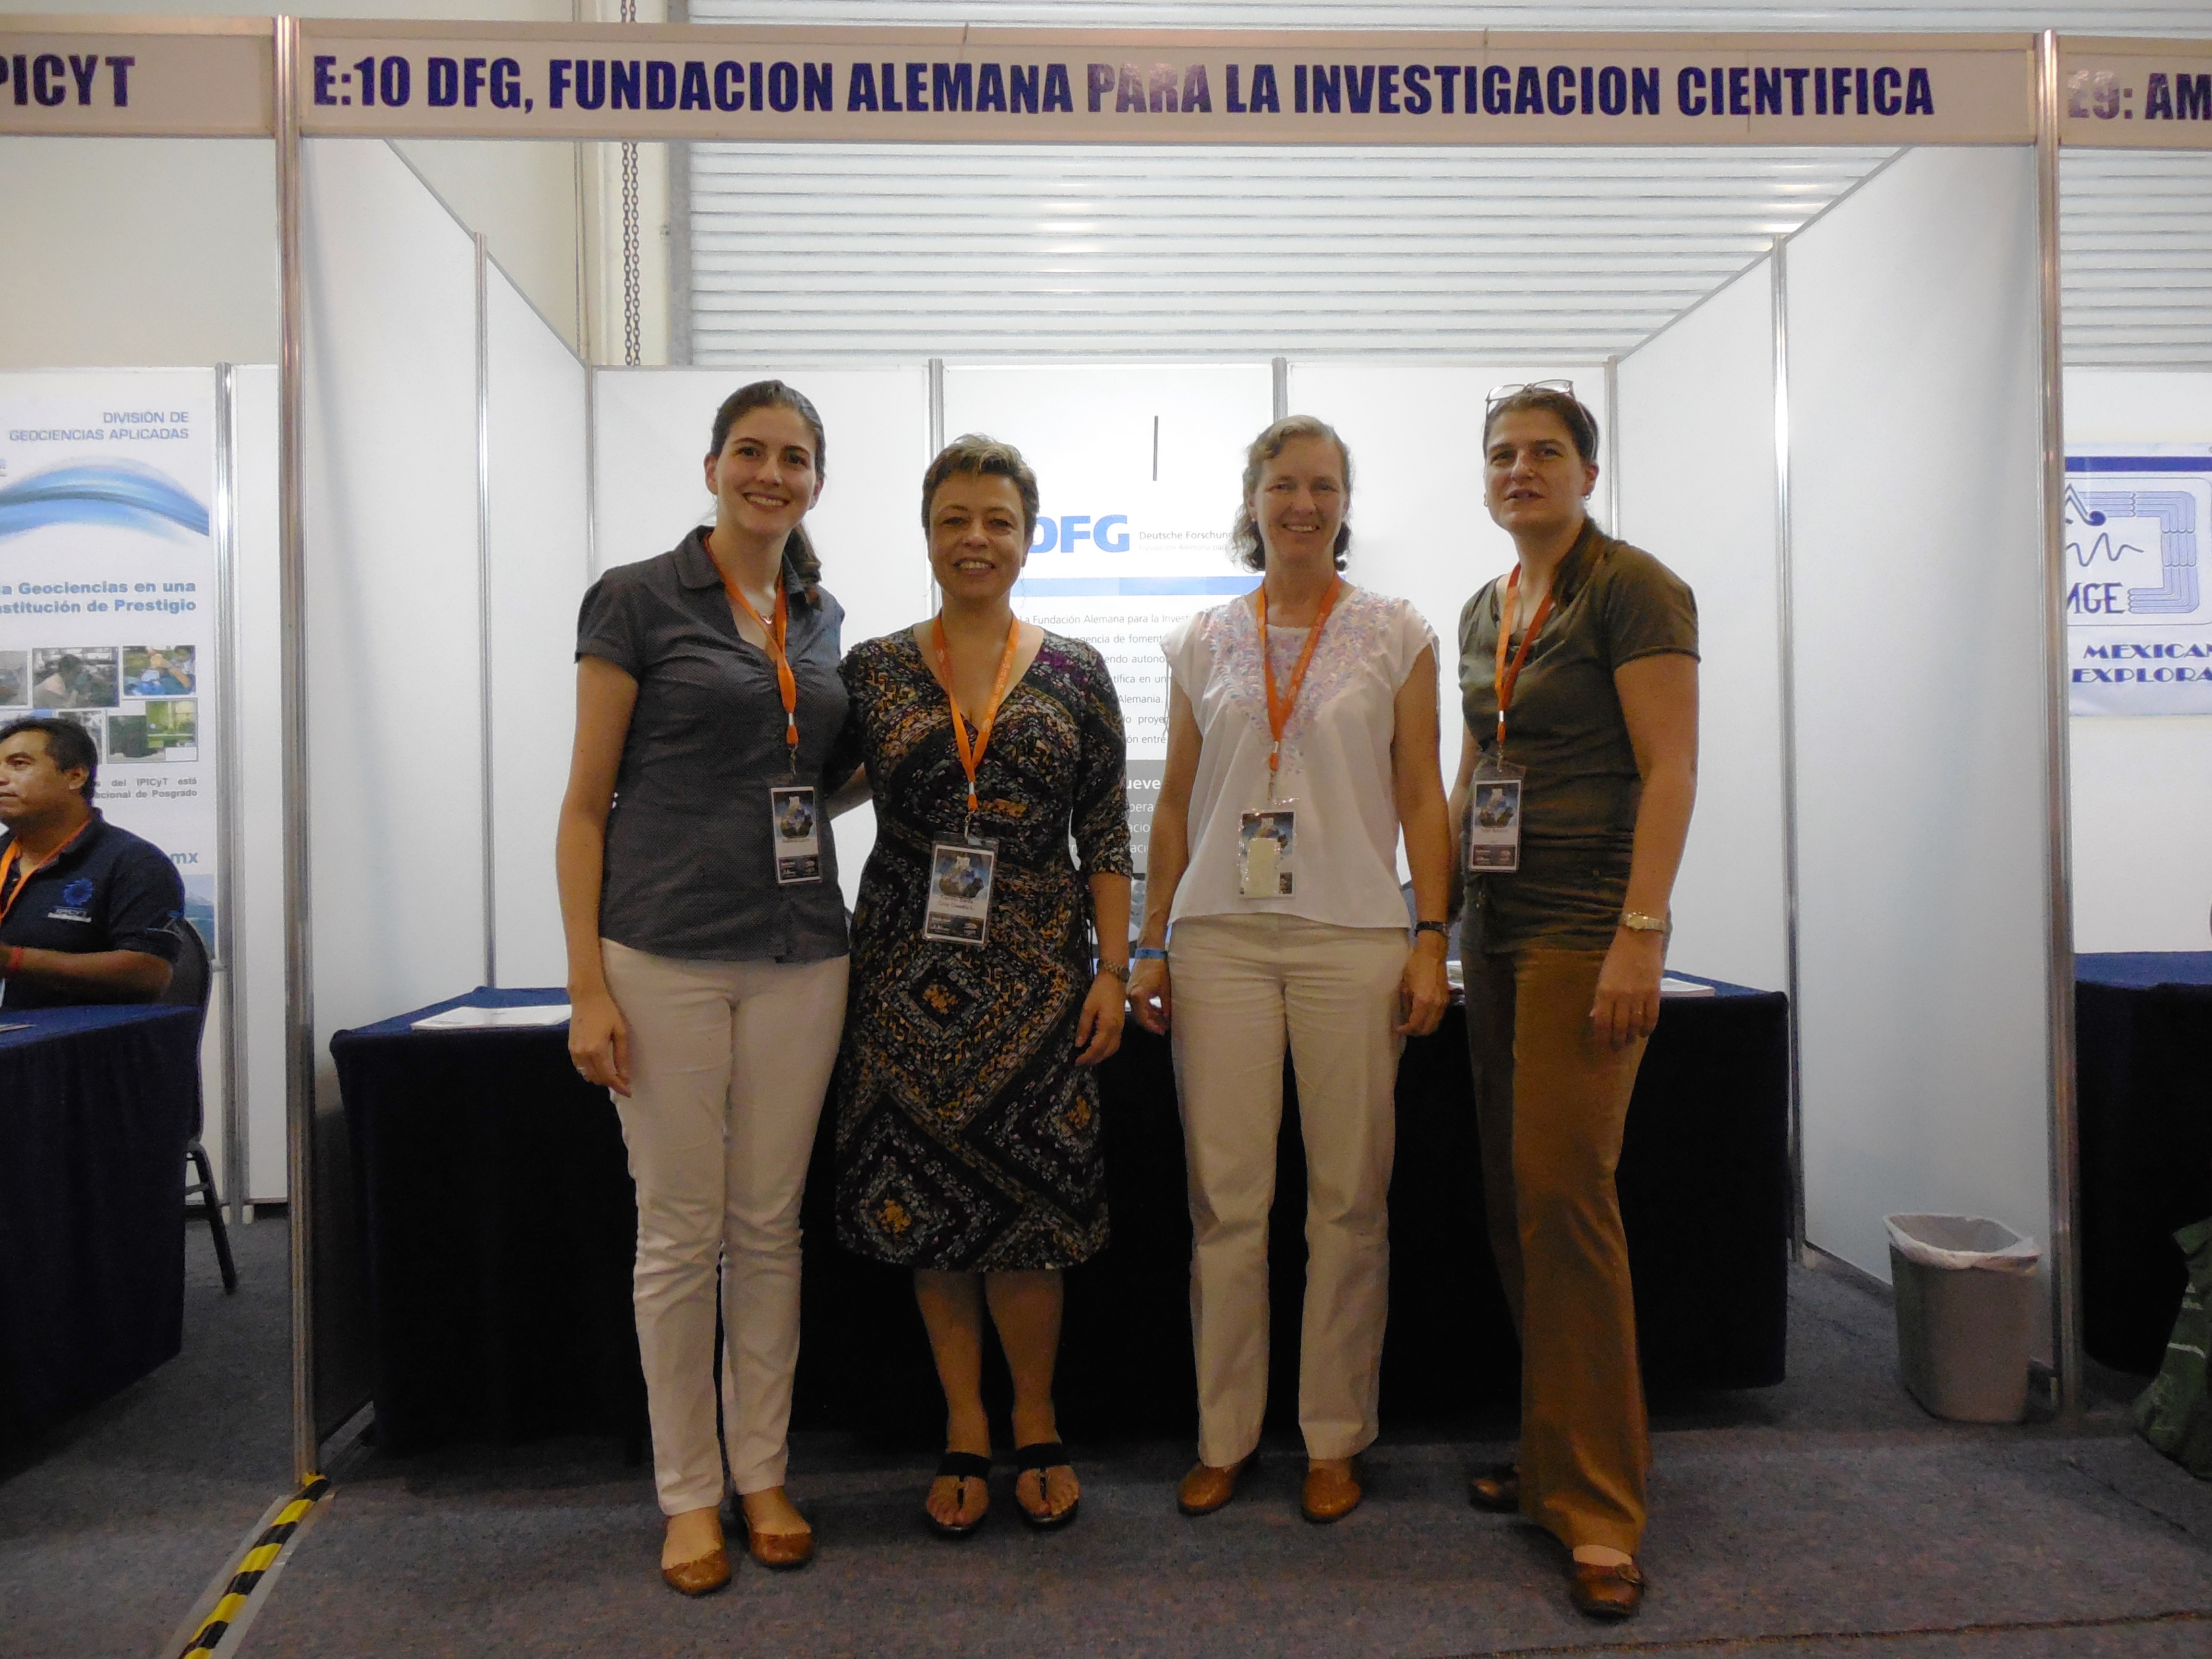 Group photo in front of the DFG stand (from left to right) Laura Redondo (DFG), Prof. Claudia Treviño (Alexander von Humboldt Foundation), Prof. Christina Siebe (DFG) and Susanne Faber (DAAD)